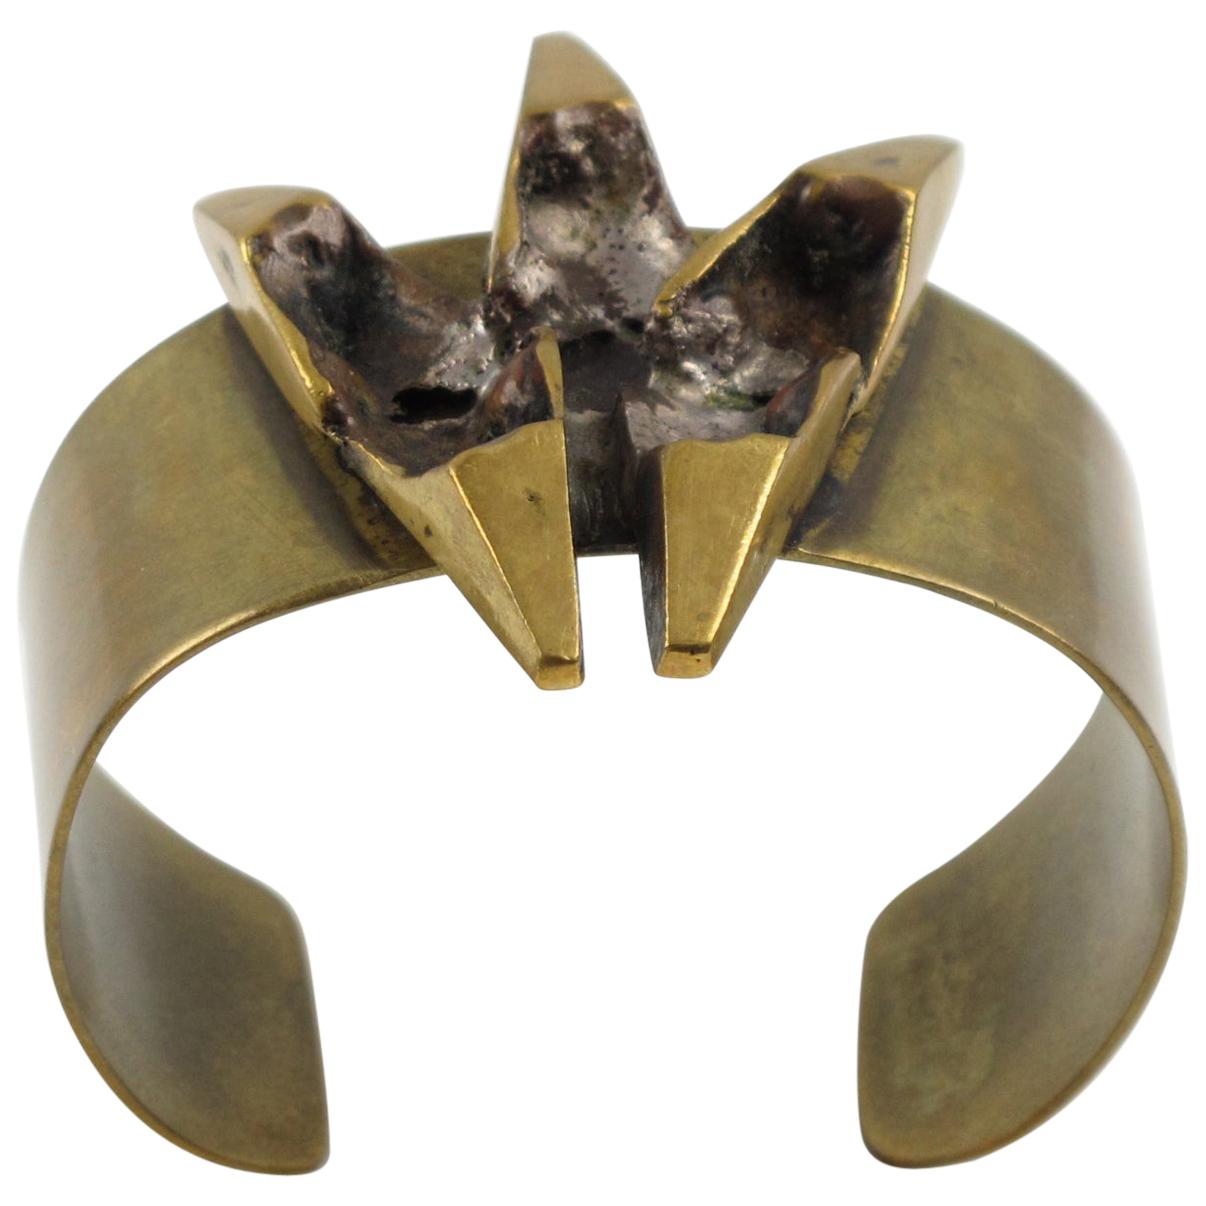 This impressive sculptural brutalist bronze cuff bracelet was designed by French sculptor and painter Henri Nogaret (1927 -). The large brass band is topped with a Mid-Century modernist abstract ornamental sculpture made of gilded bronze. The